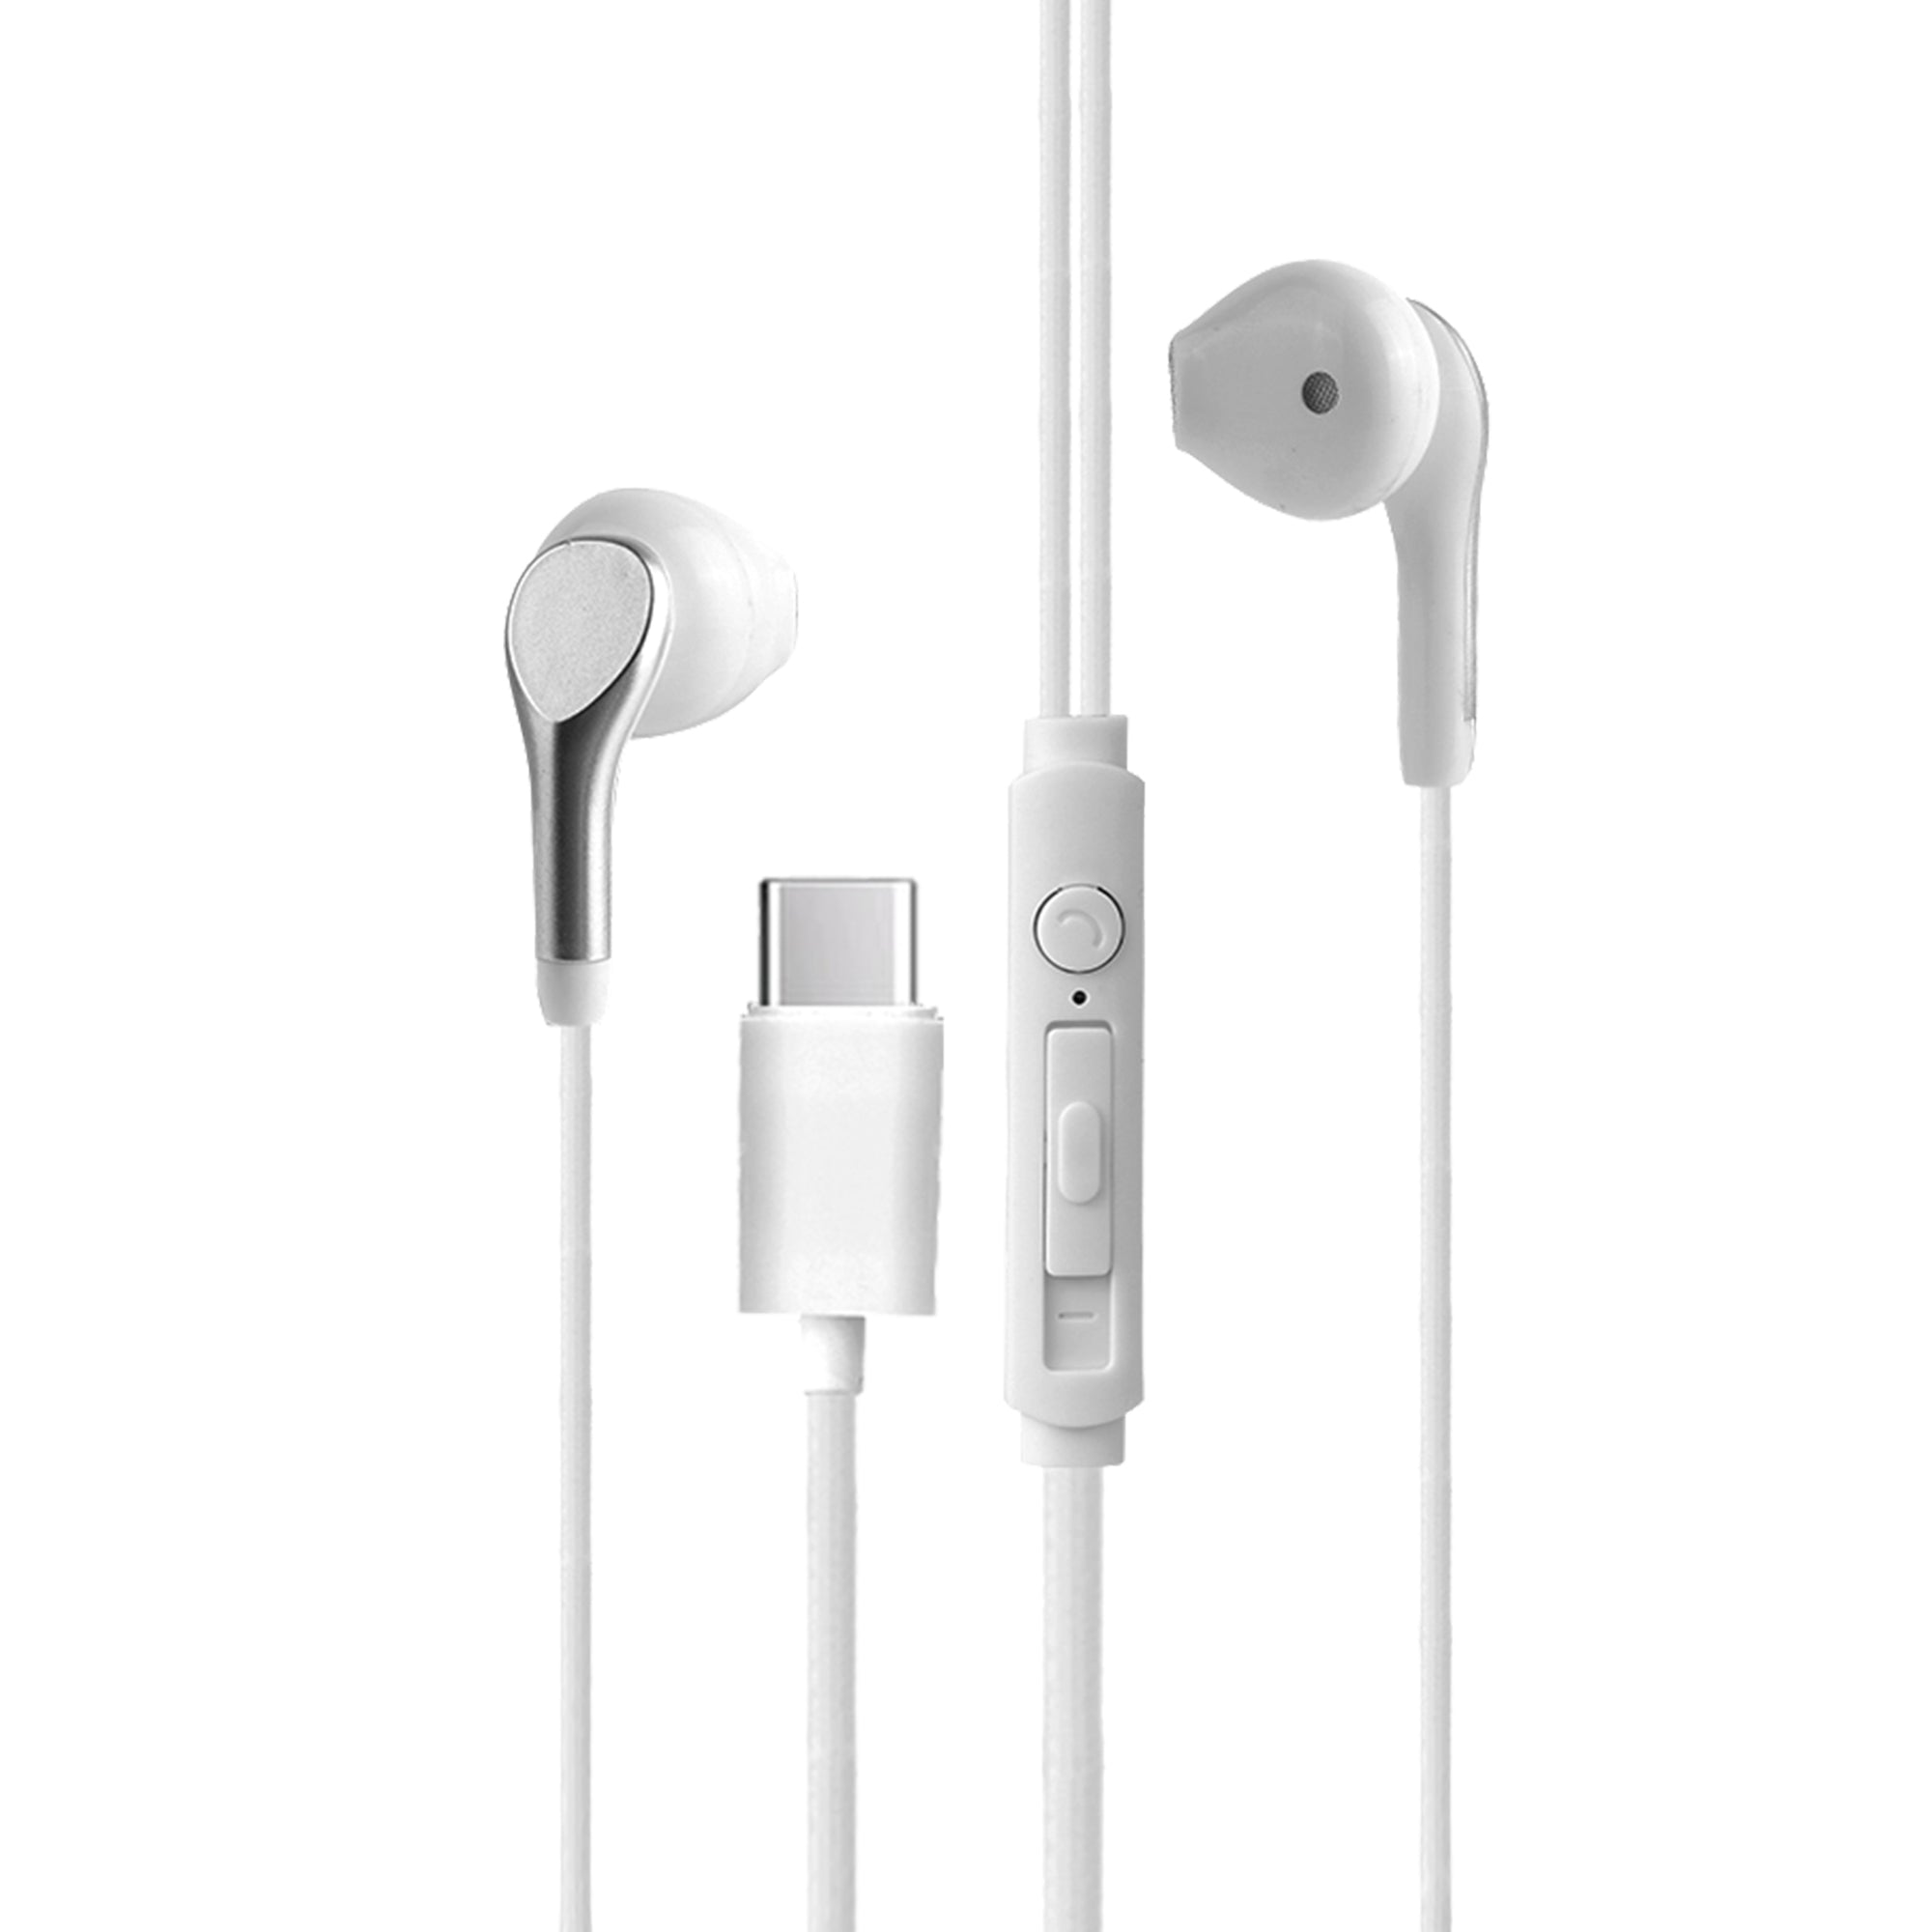 Gizmore ME343 Type C Earphones High Bass and Noise Reduction Unique Sports Earphone with HD Microphone